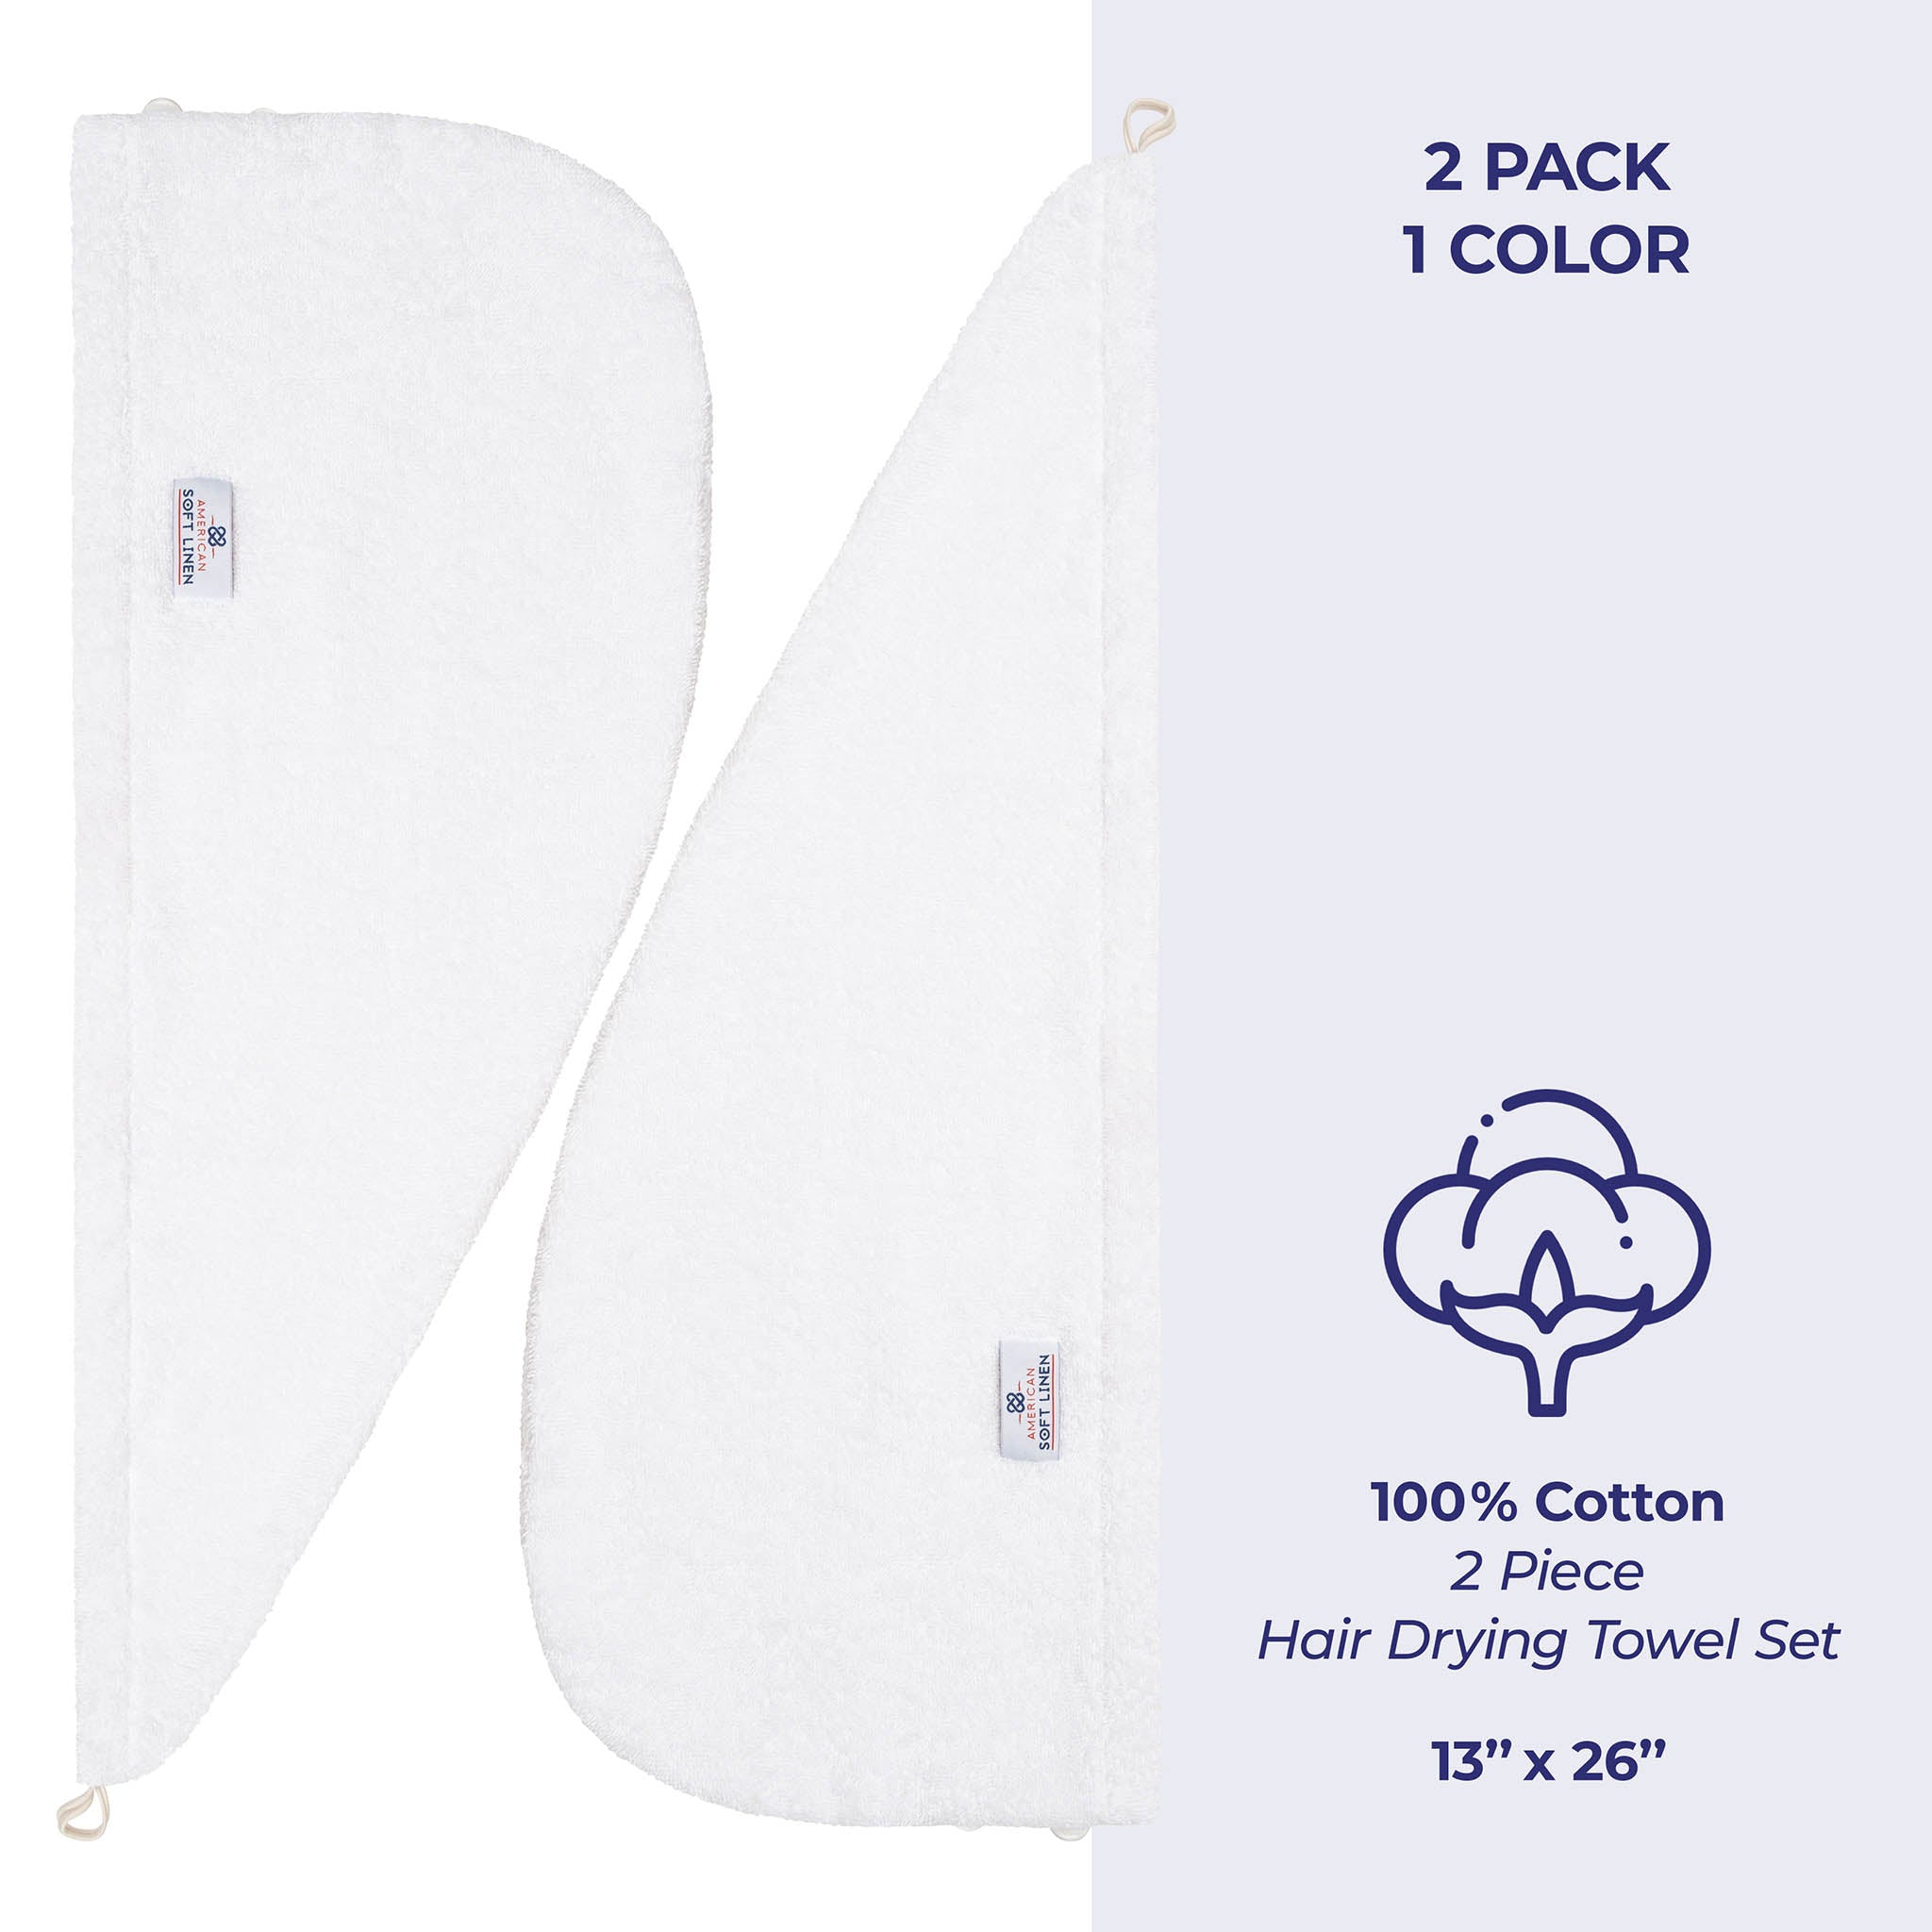 American Soft Linen 100% Cotton Hair Drying Towels for Women 2 pack 75 set case pack white-4